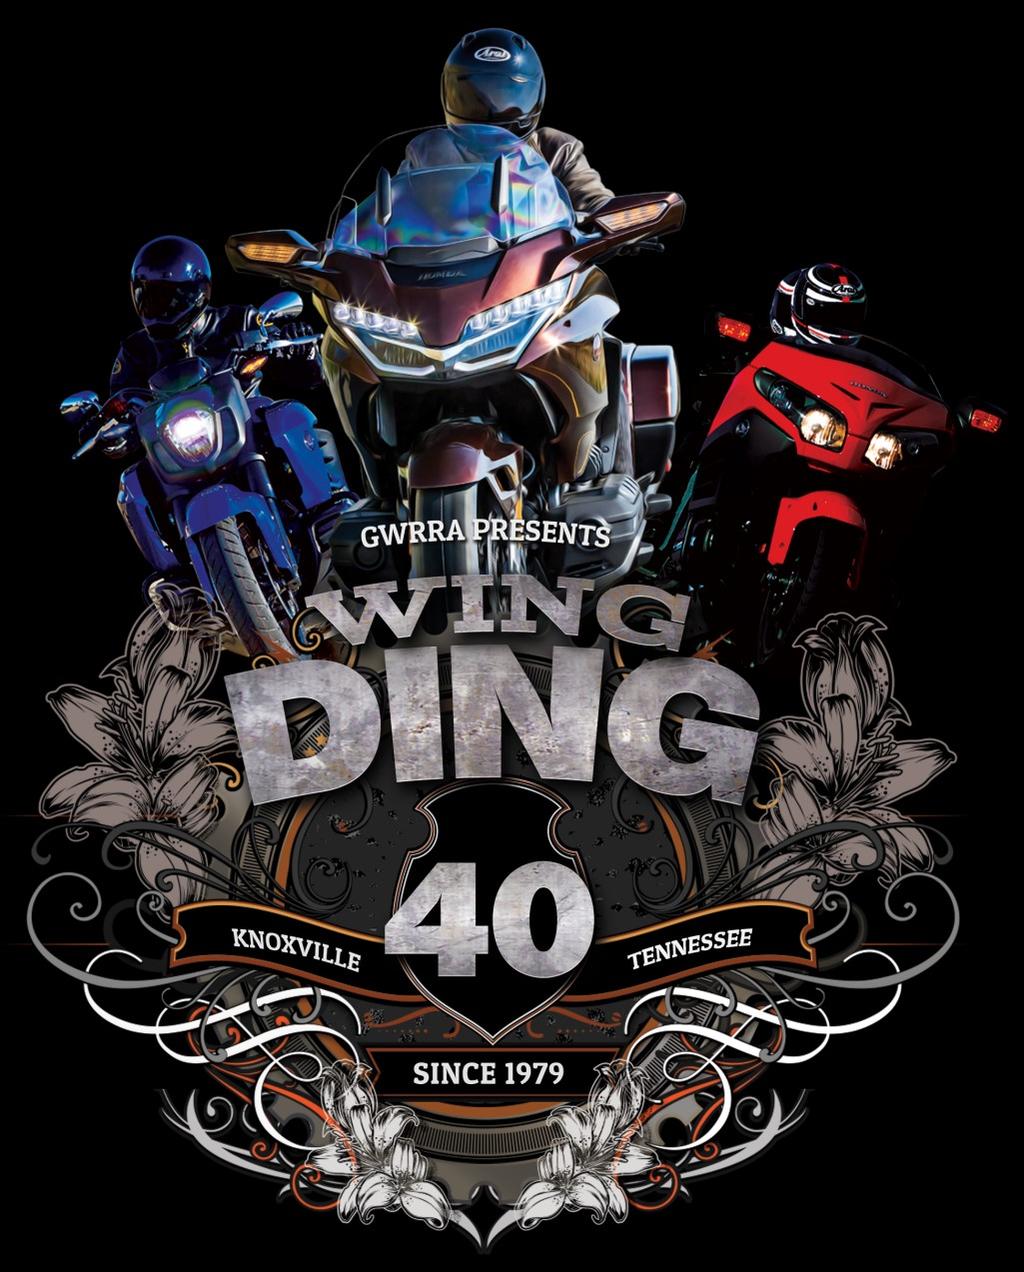 Wing Ding 40 Knoxville, TN To make a hotel reservation, please call 865-342-9191 Do not call the hotels directly All reservations must be made through Visit Knoxville in order to receive the